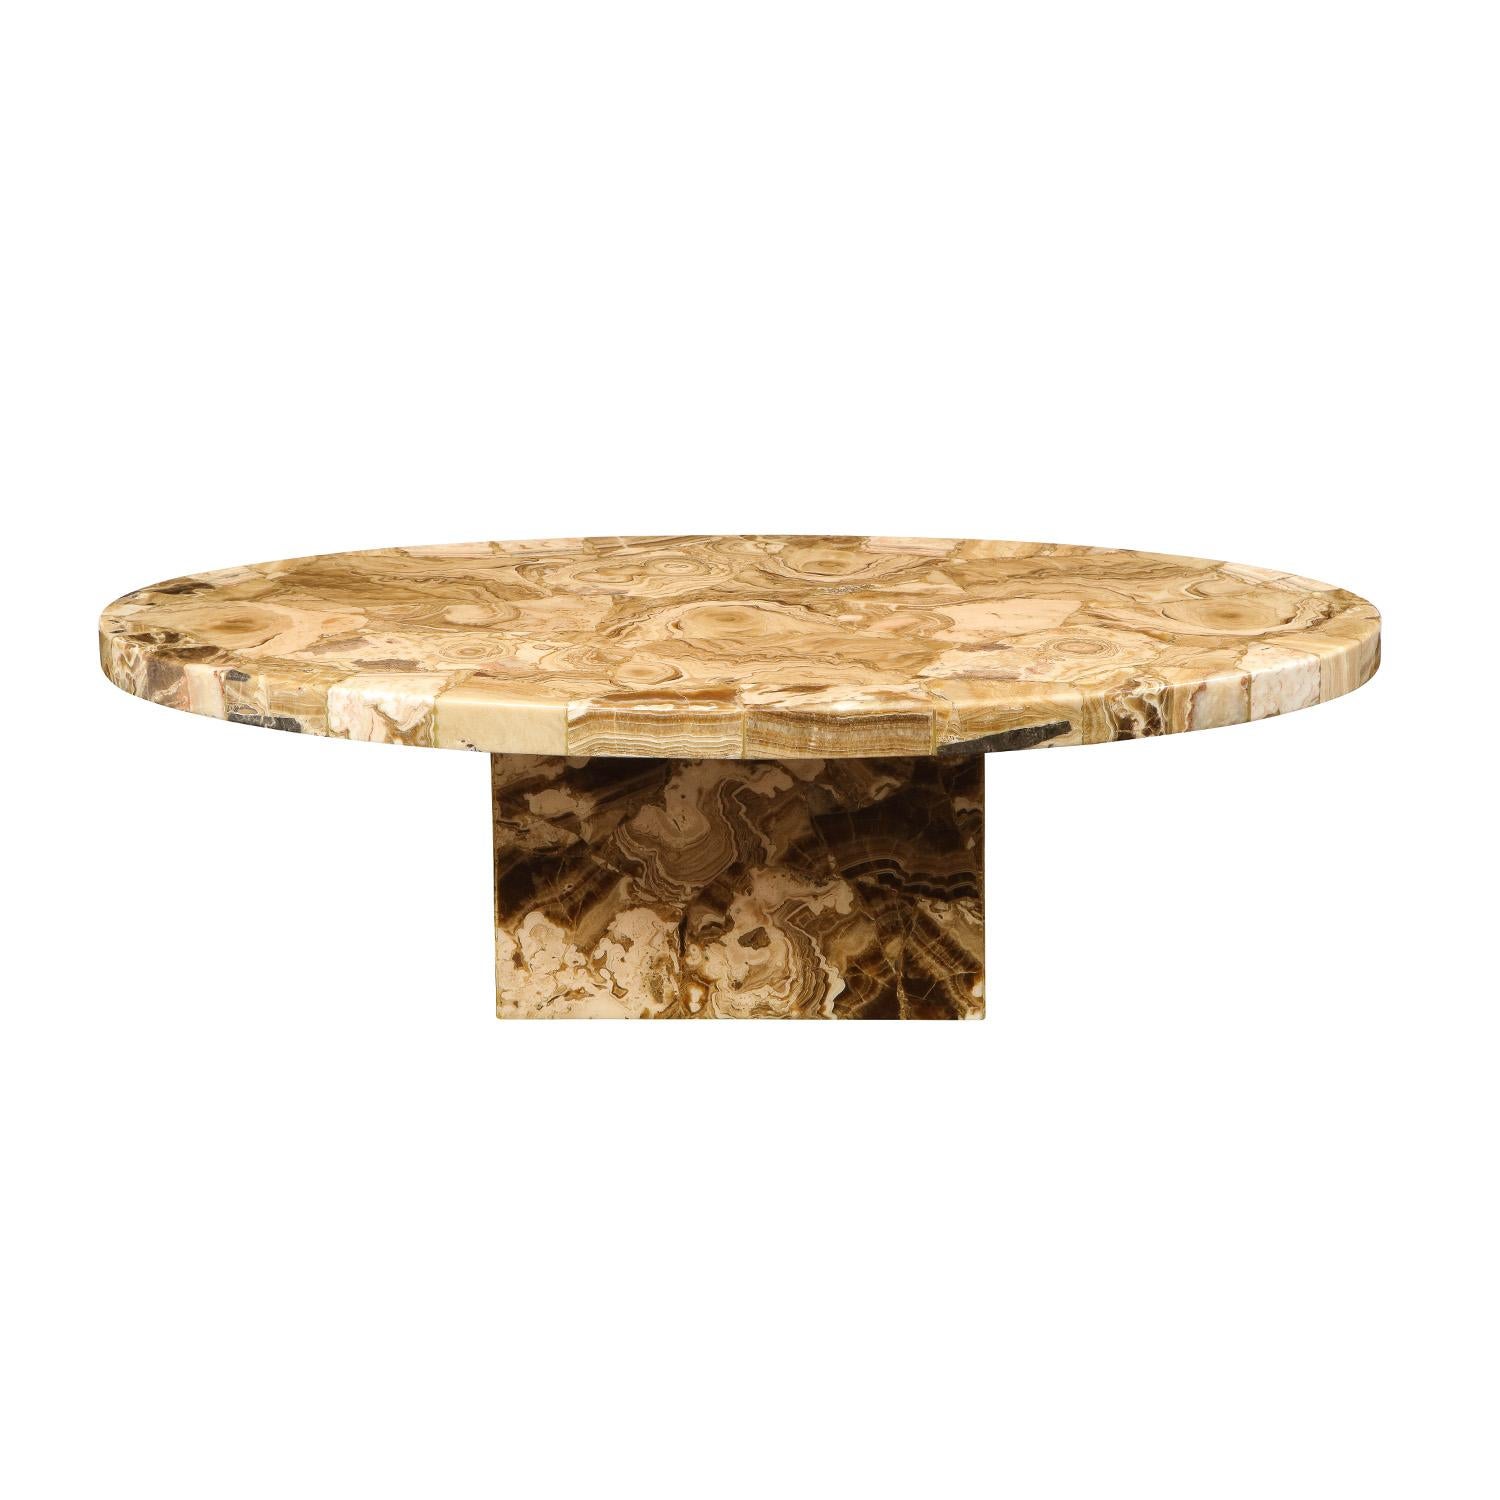 Artisan crafted surfboard shaped coffee table in polished tessellated brown onyx, custom design, American 1970's. The onyx is continuous from the sides to the top. This design is very luxurious and chic.